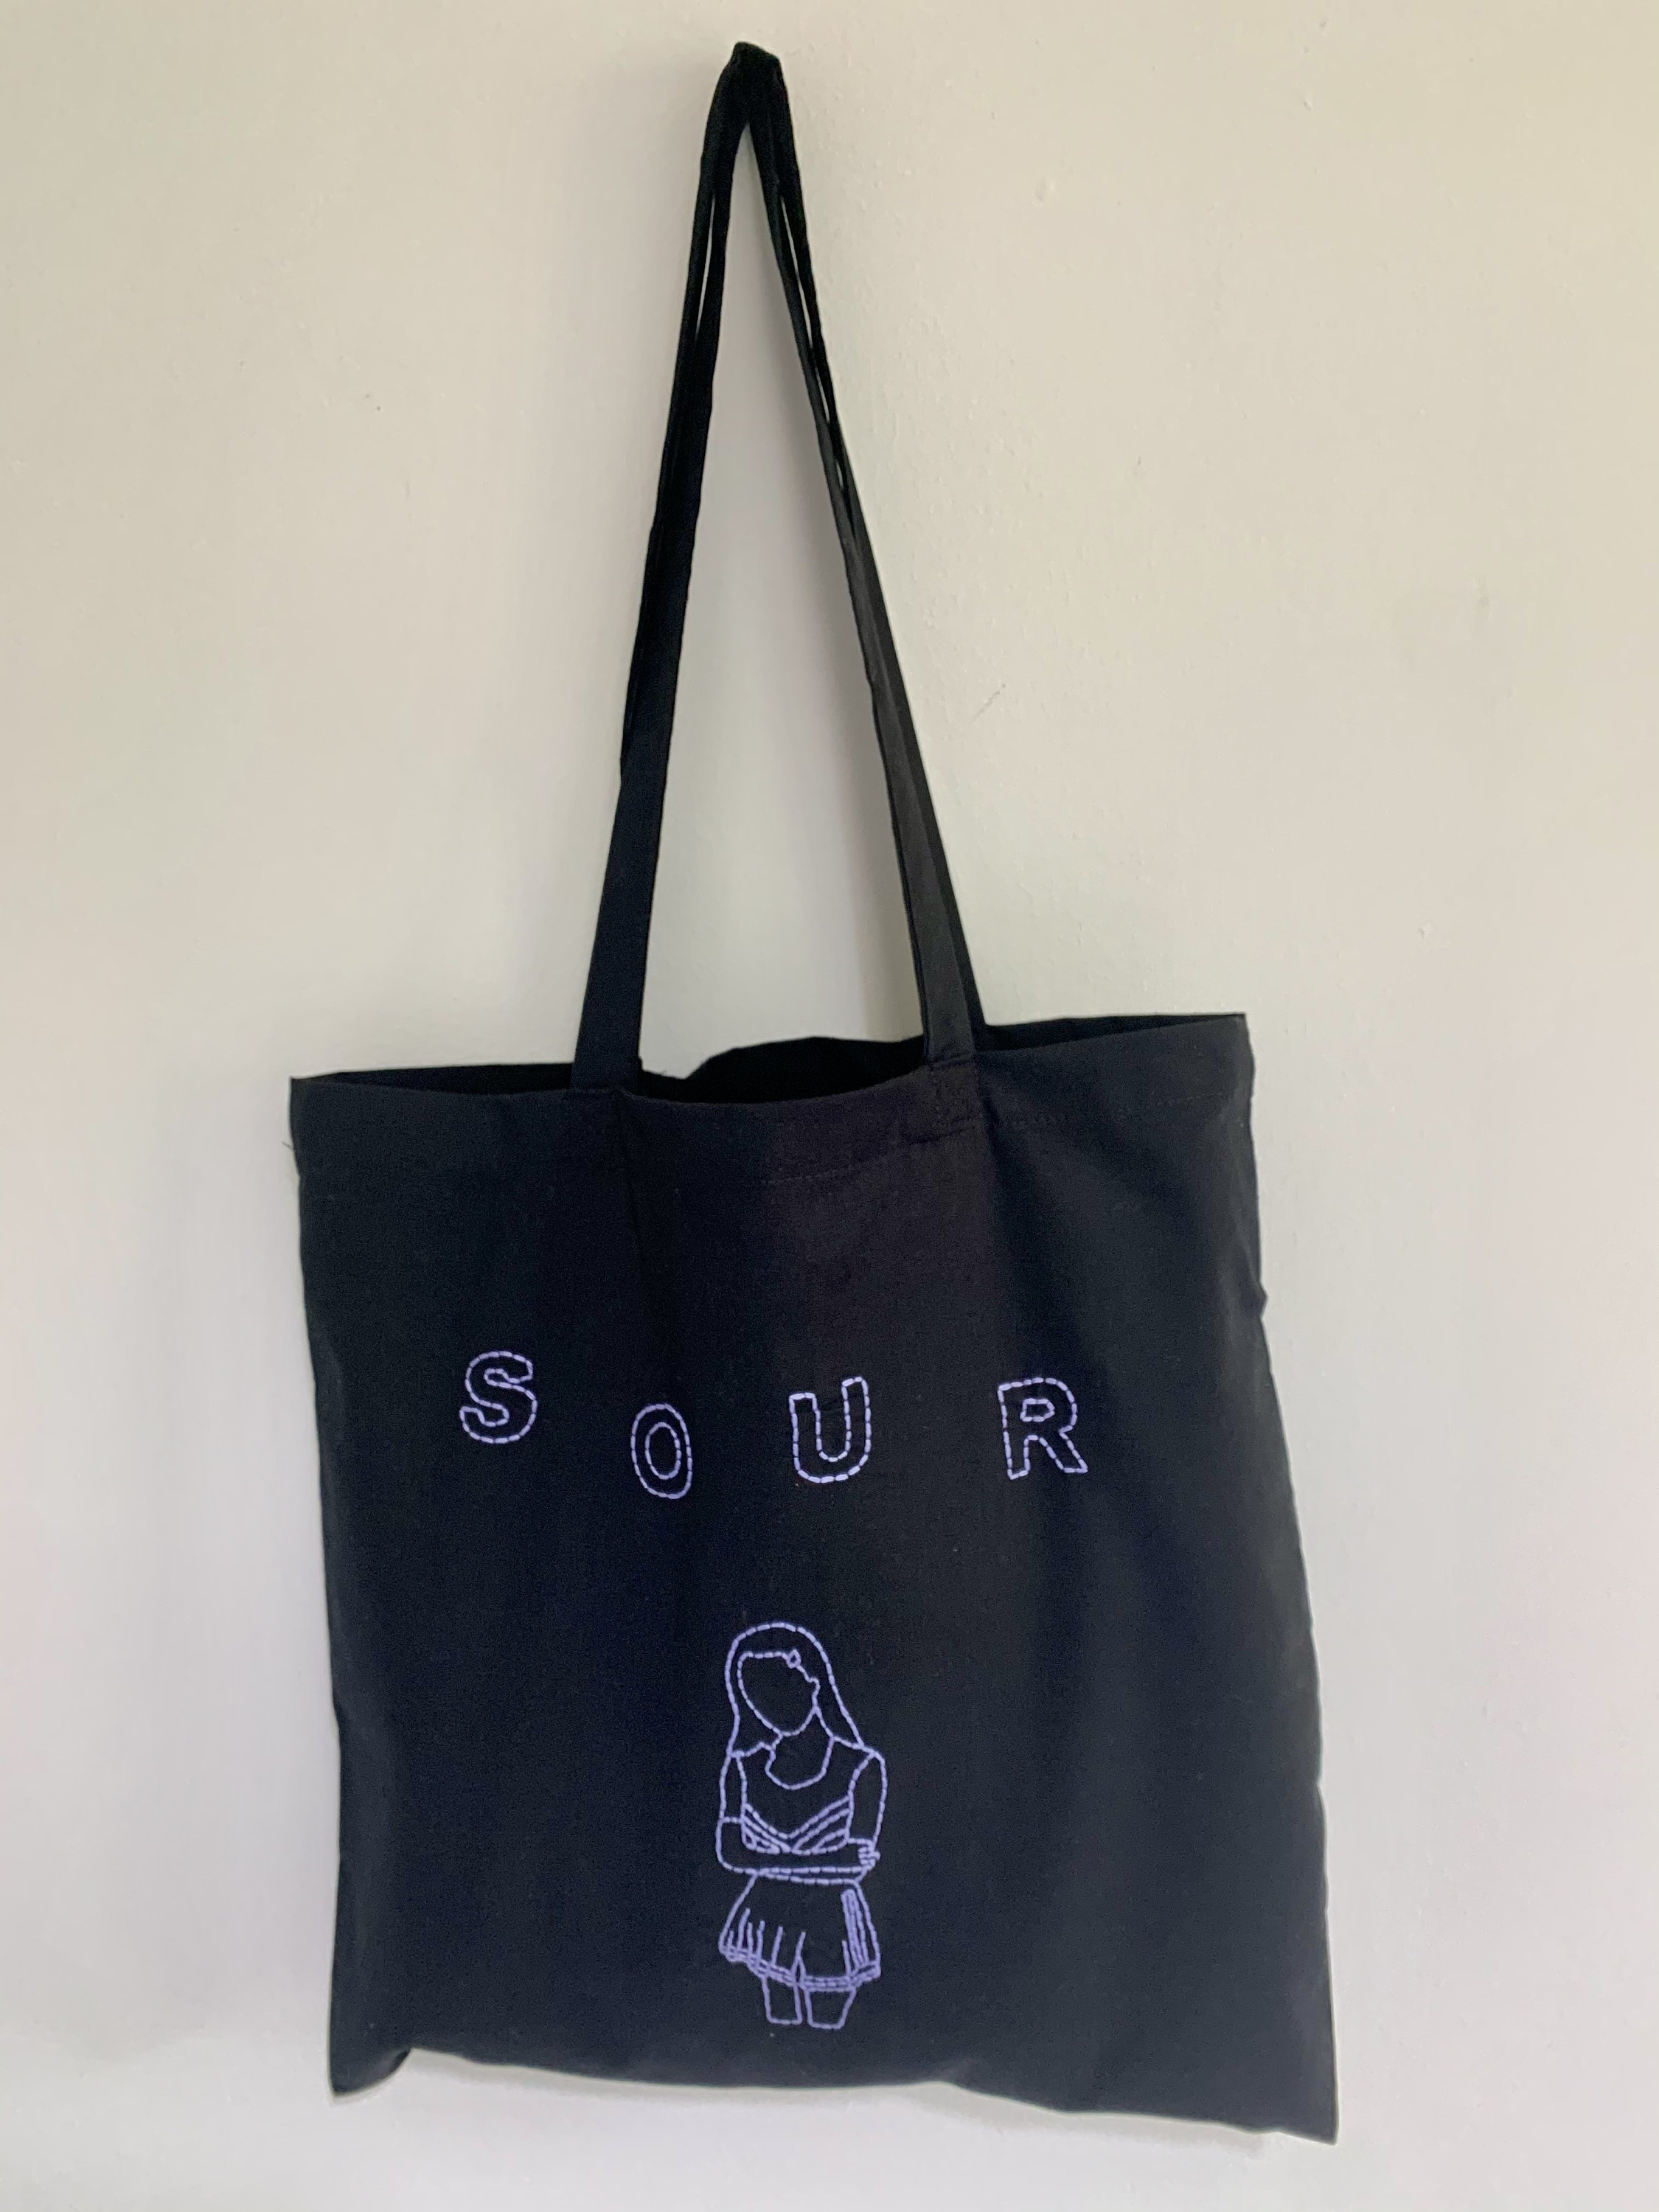 SOUR Olivia Rodrigo inspired embroidered pastel tote bags